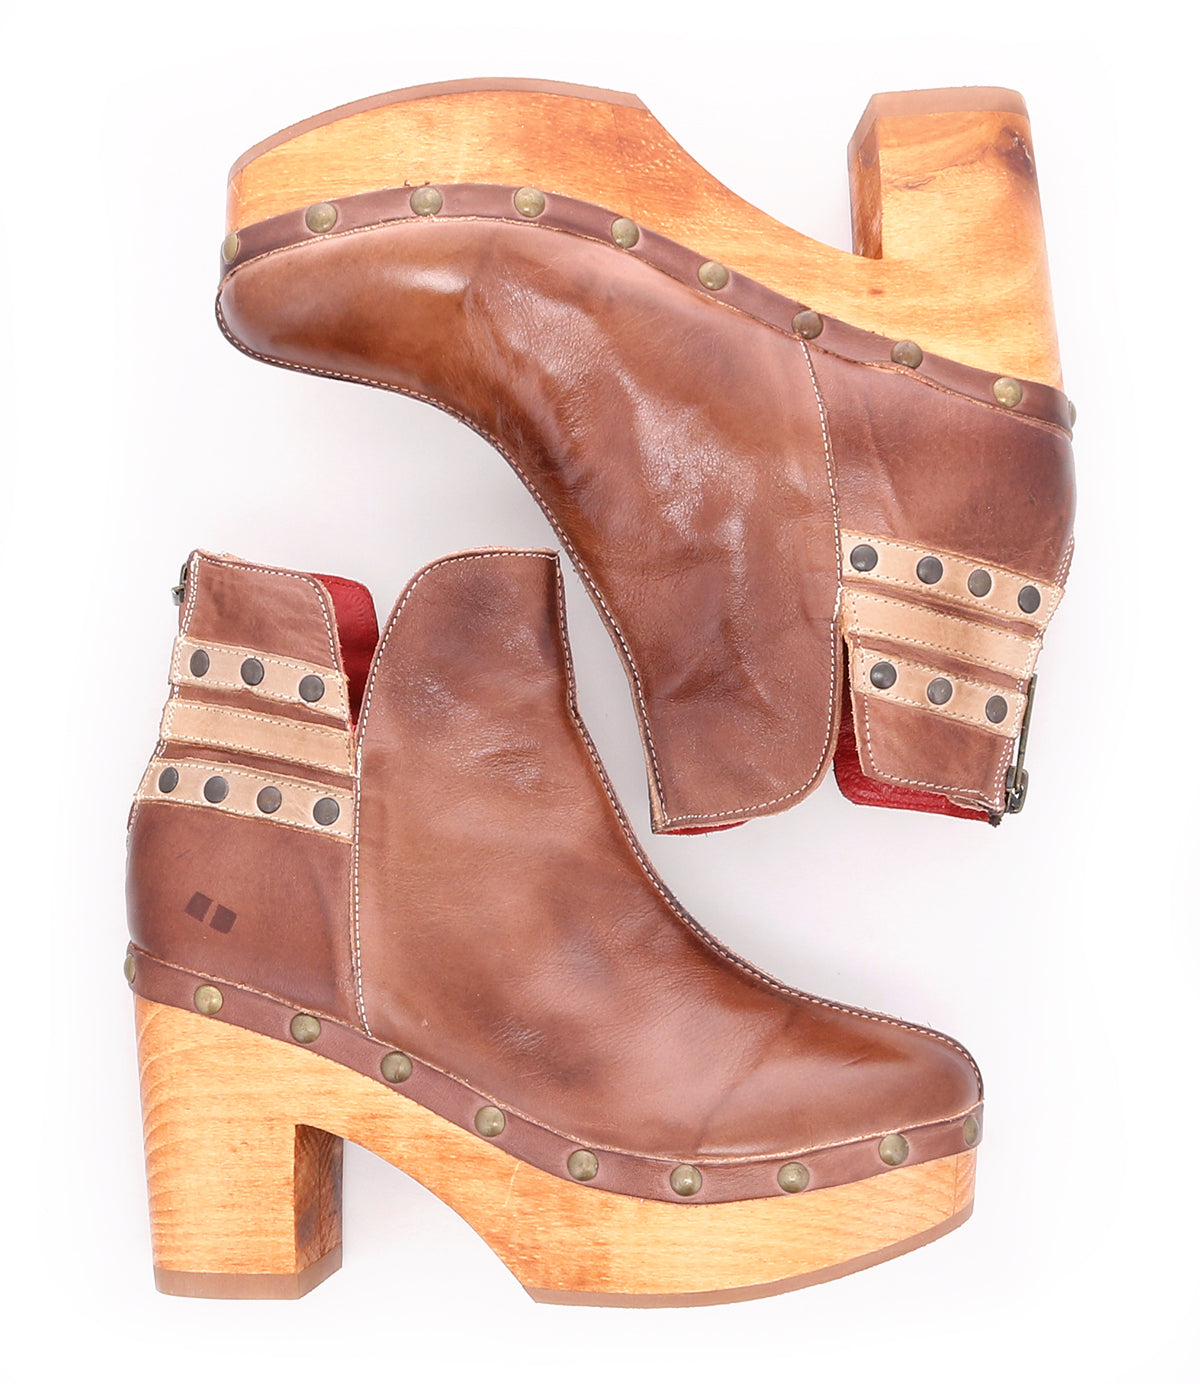 A pair of Viena brown leather booties by Bed Stu with wooden heels and stud detail.